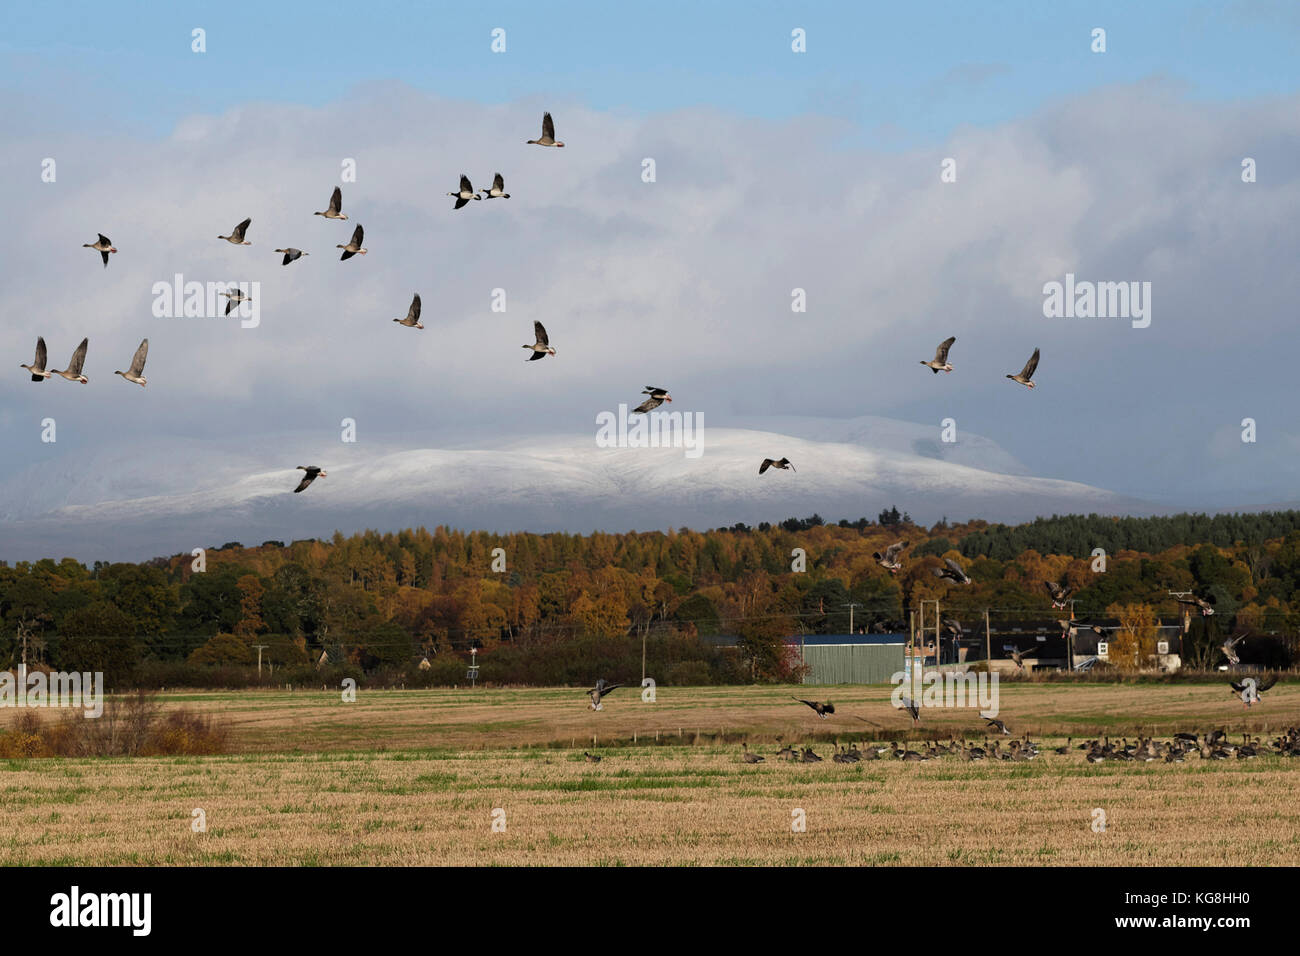 5/11/2017. The first of Scotland's winter snow arrived overnight on Ben Wyvis near Dingwall in the Scottish Highlands. Its coming coincided with the arrivall of flocks of Canada Geese as they make their summer migration form the colder climes in Iceland and the Arctic. Stock Photo